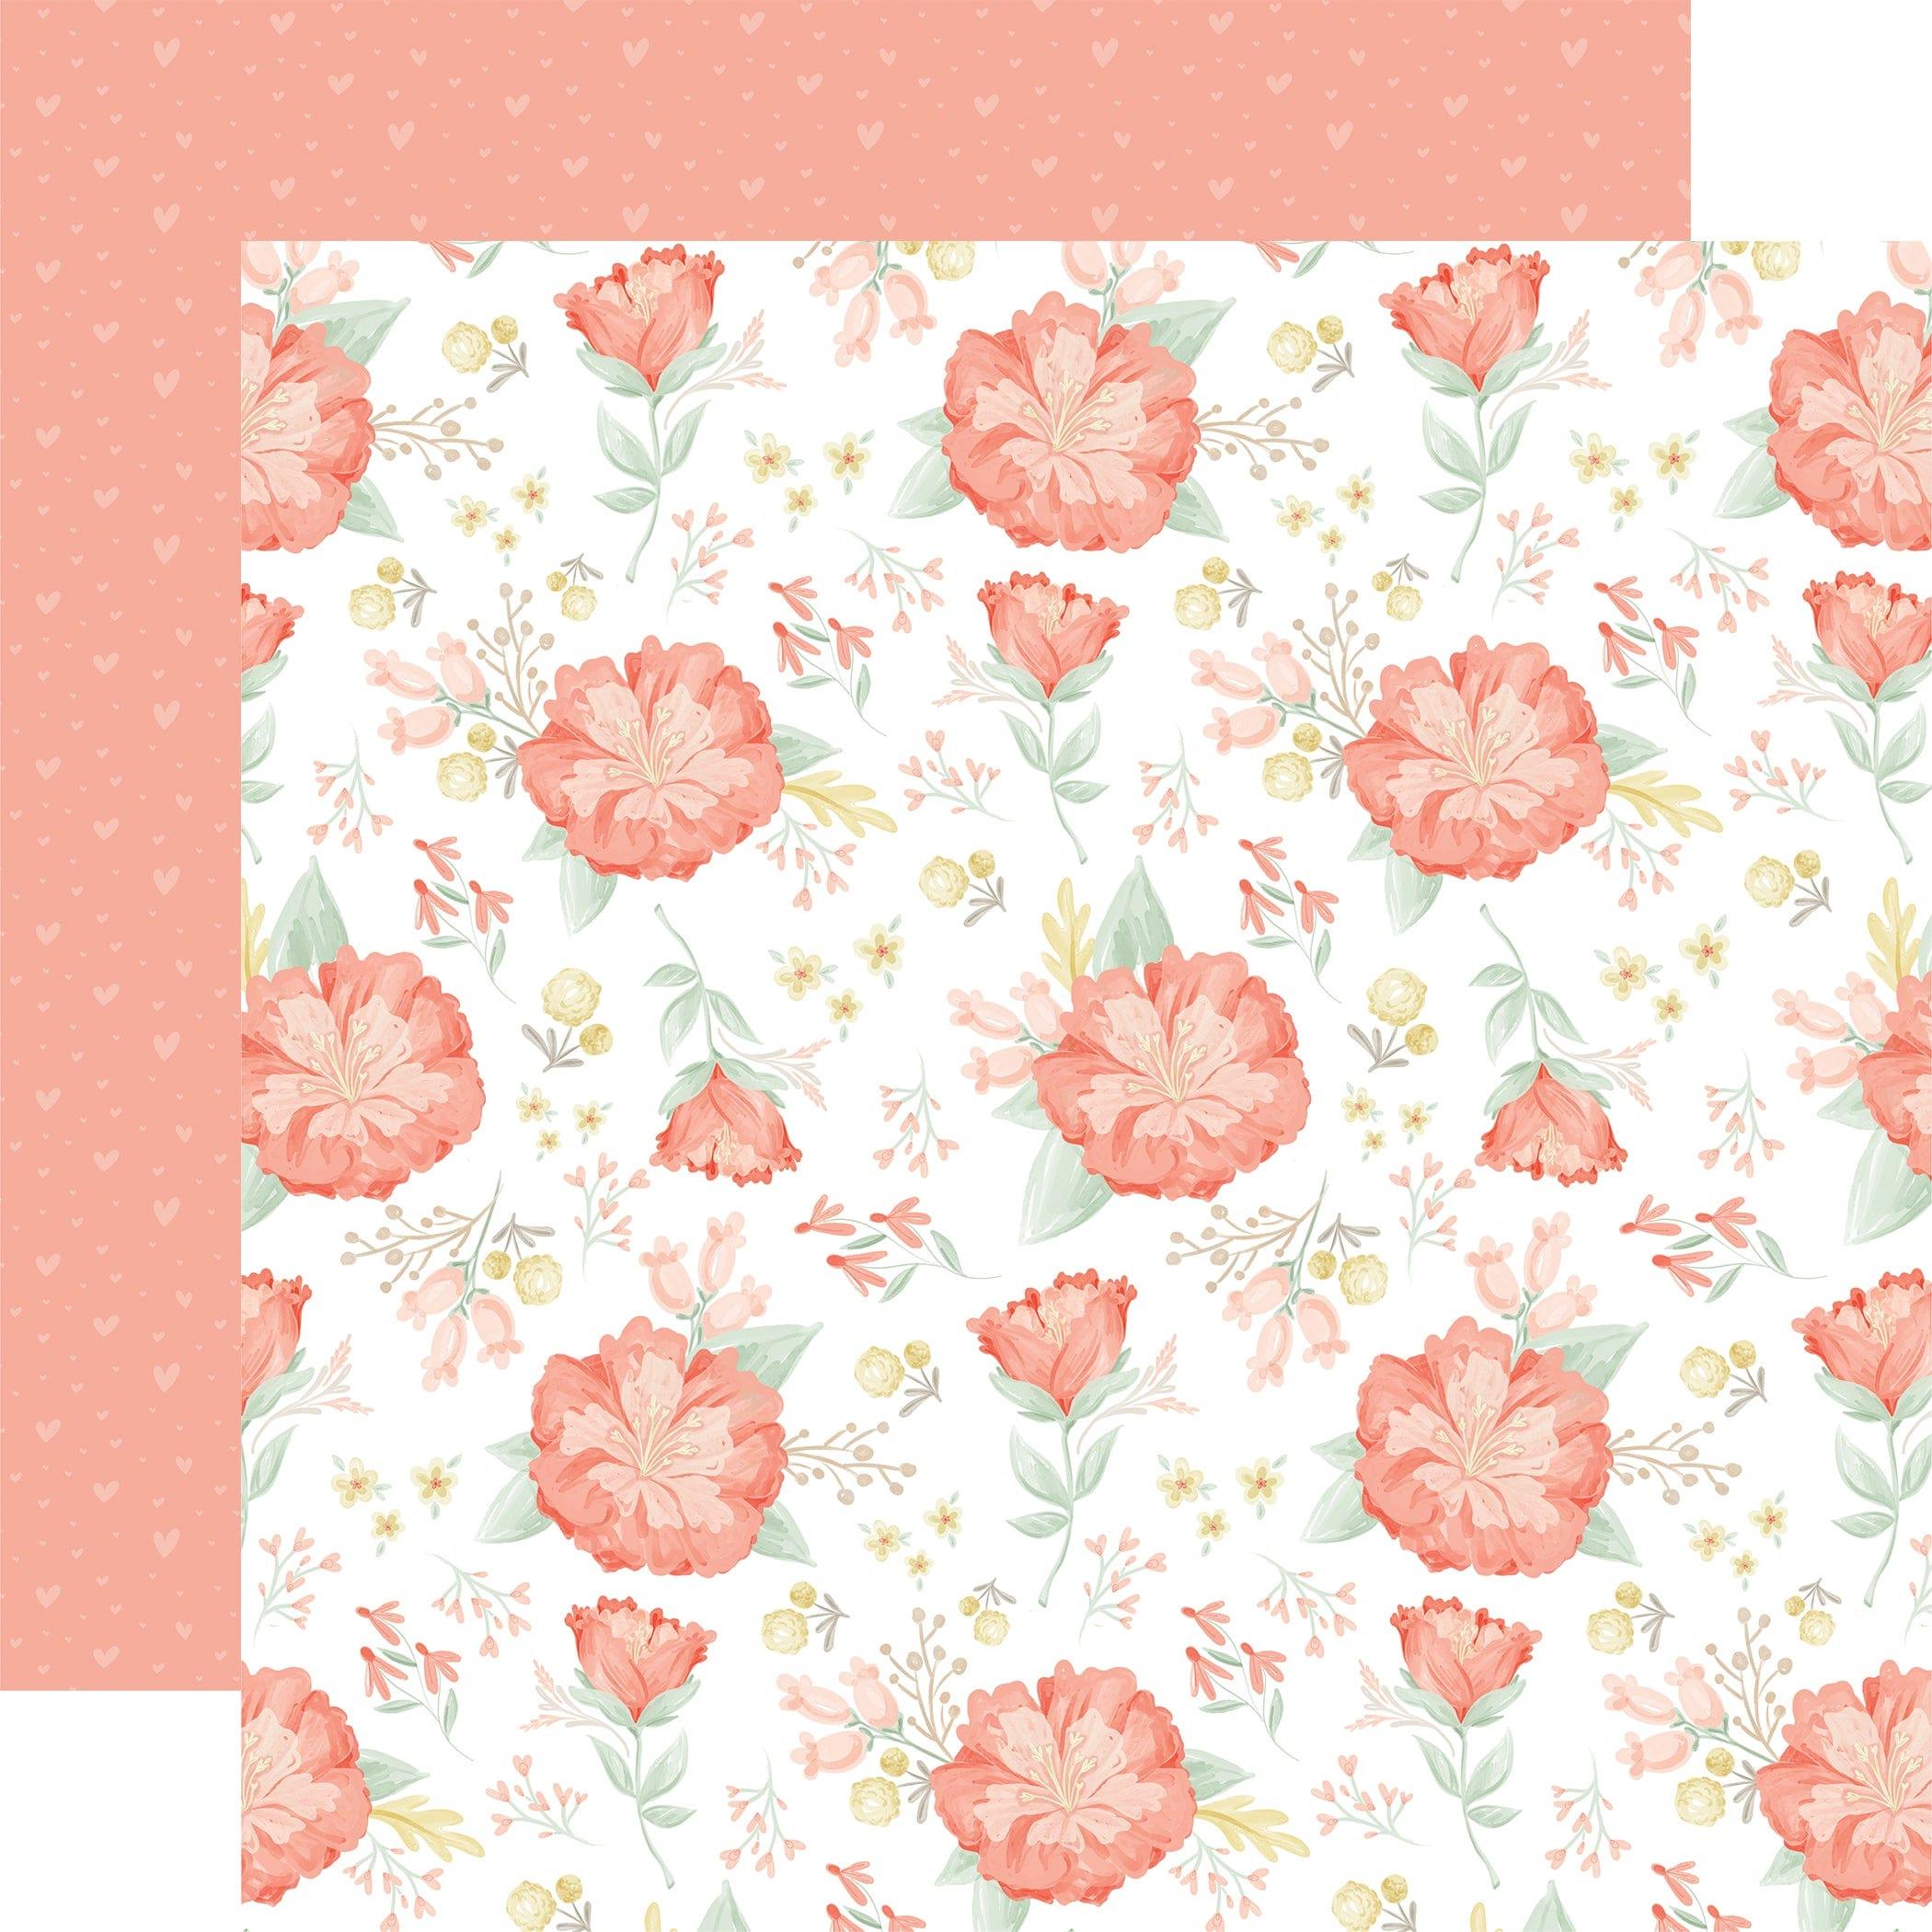 It's A Girl Collection Blushing Blooms 12 x 12 Double-Sided Scrapbook Paper by Echo Park Paper - Scrapbook Supply Companies